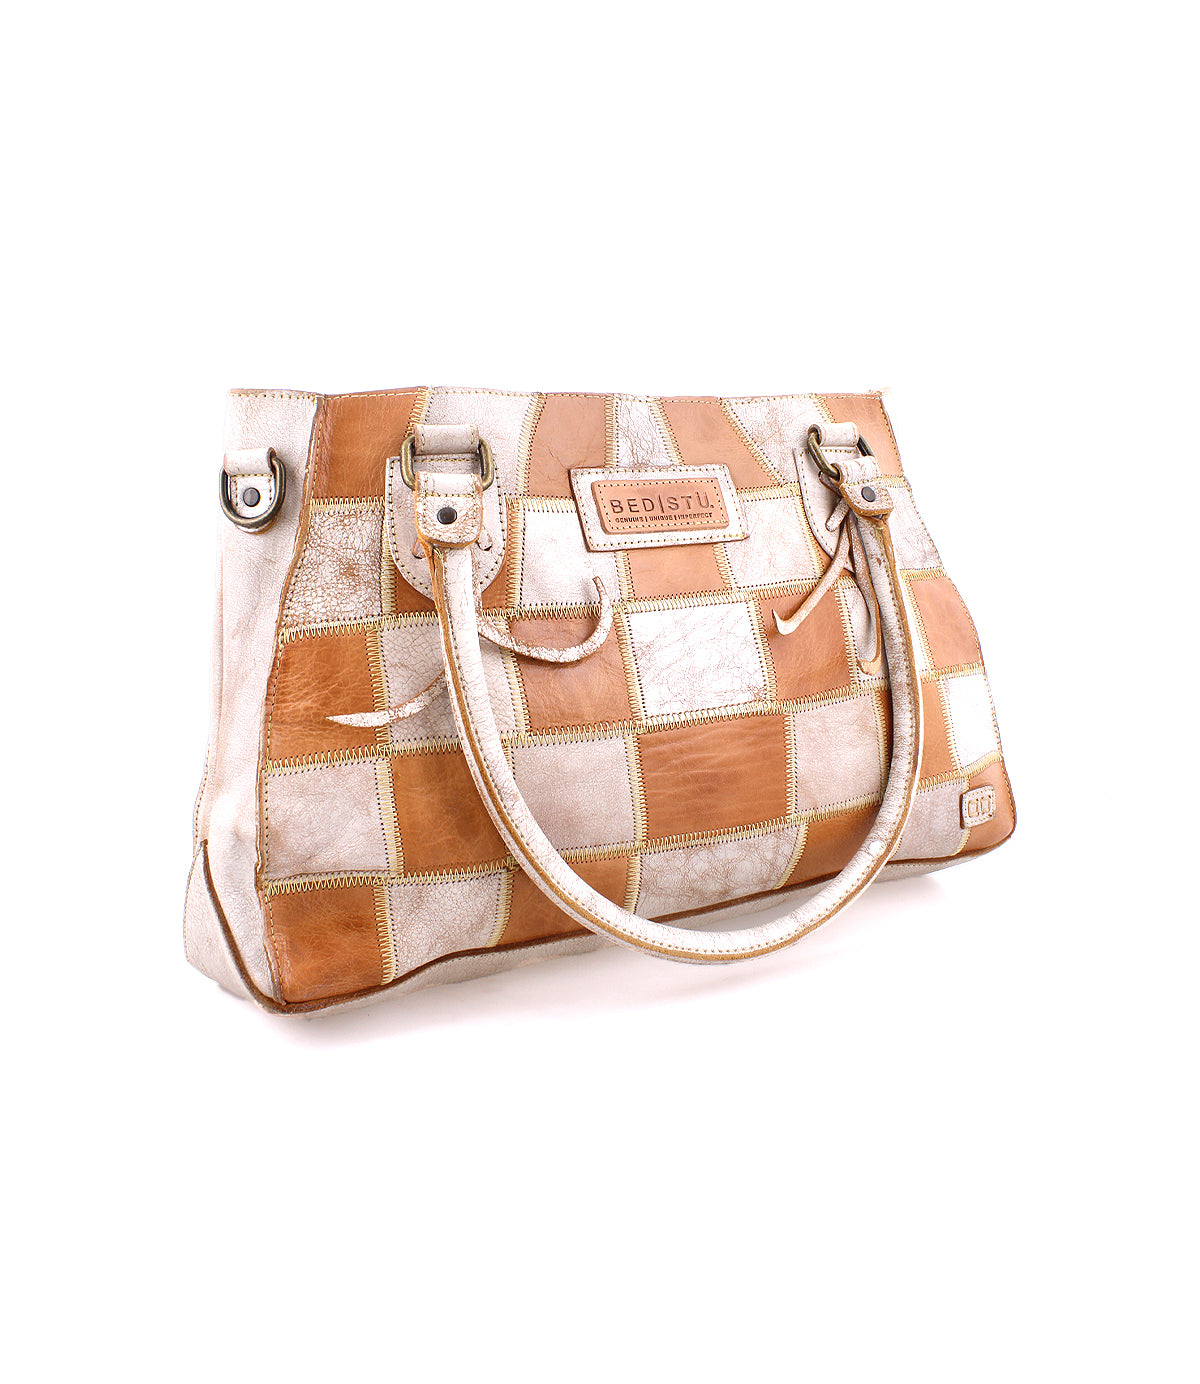 An environmentally responsible Rockababy SL handbag made from upcycled leather with a checkered pattern by Bed Stu.